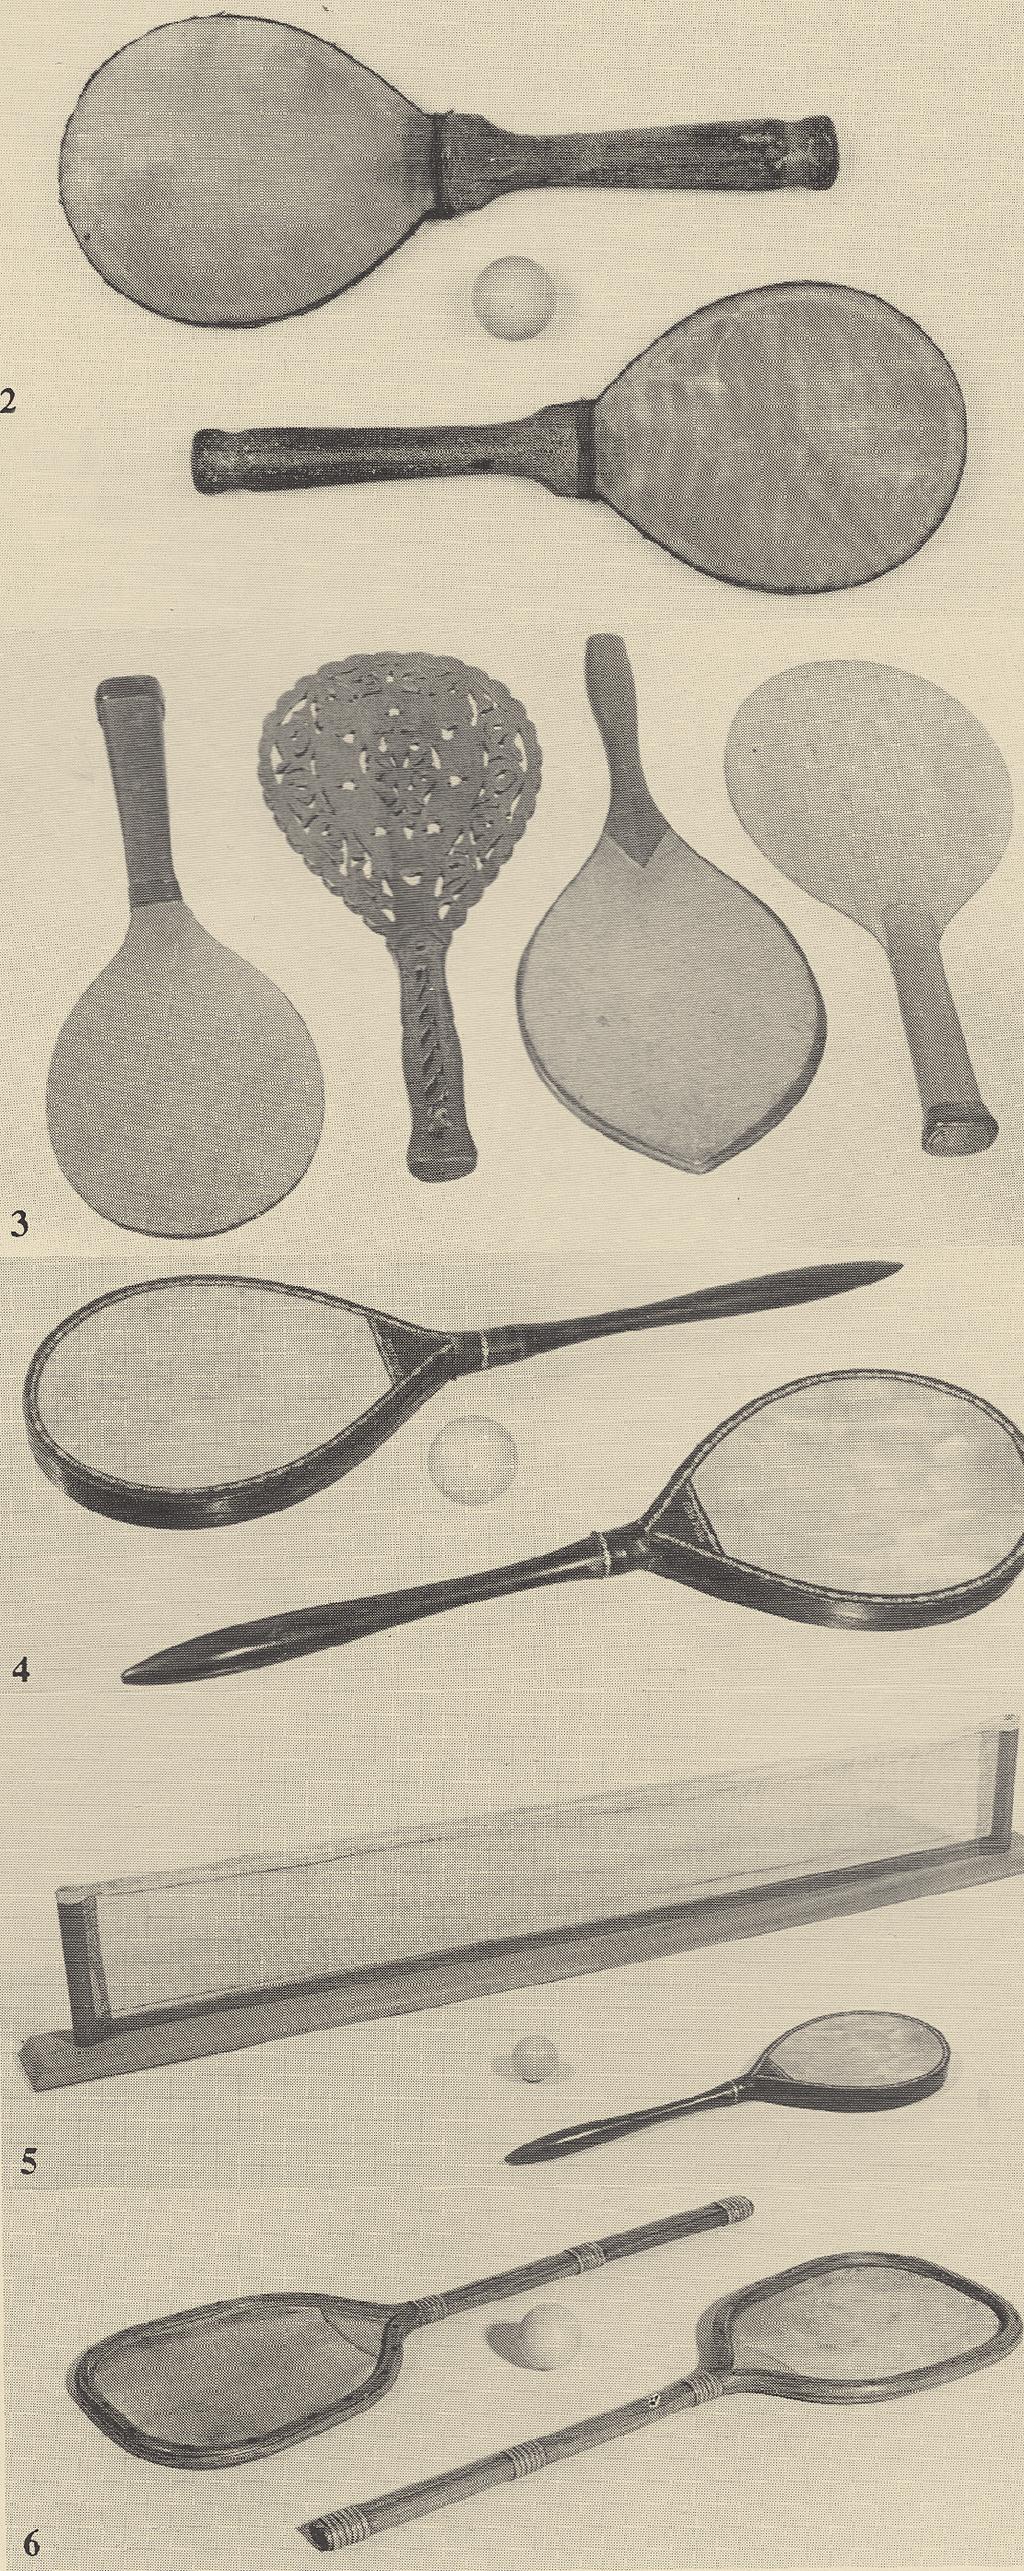 Of Sport The History Of Table Tennis Equipment & Etiquette TABLE: Cavendish Club laws of early 1901 established that a table should be nine feet by five feet and the earliest Ping Pong Association